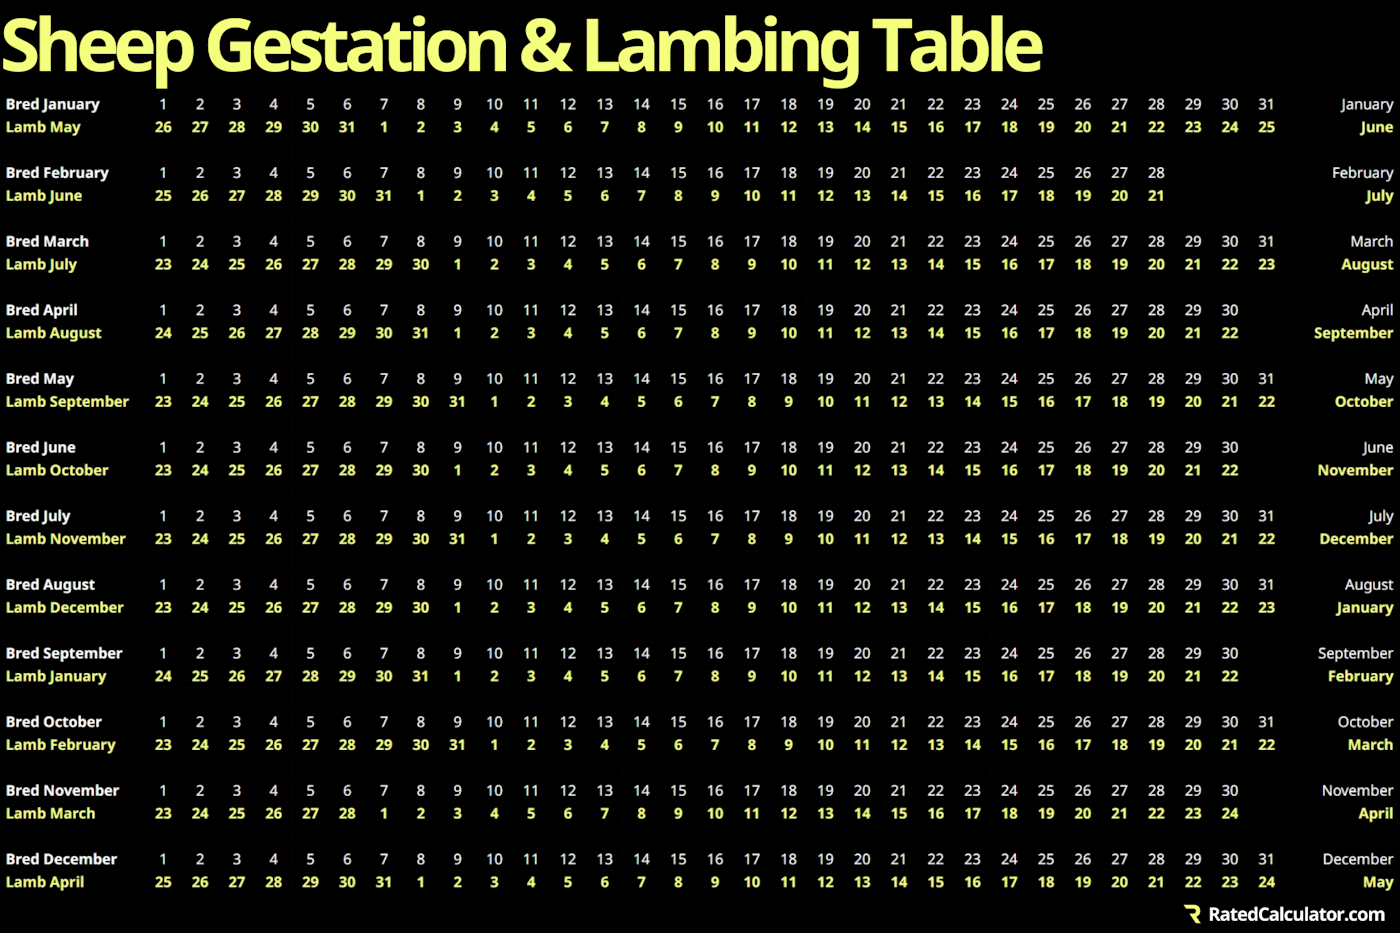 Sheep gestation and lambing table for the entire year